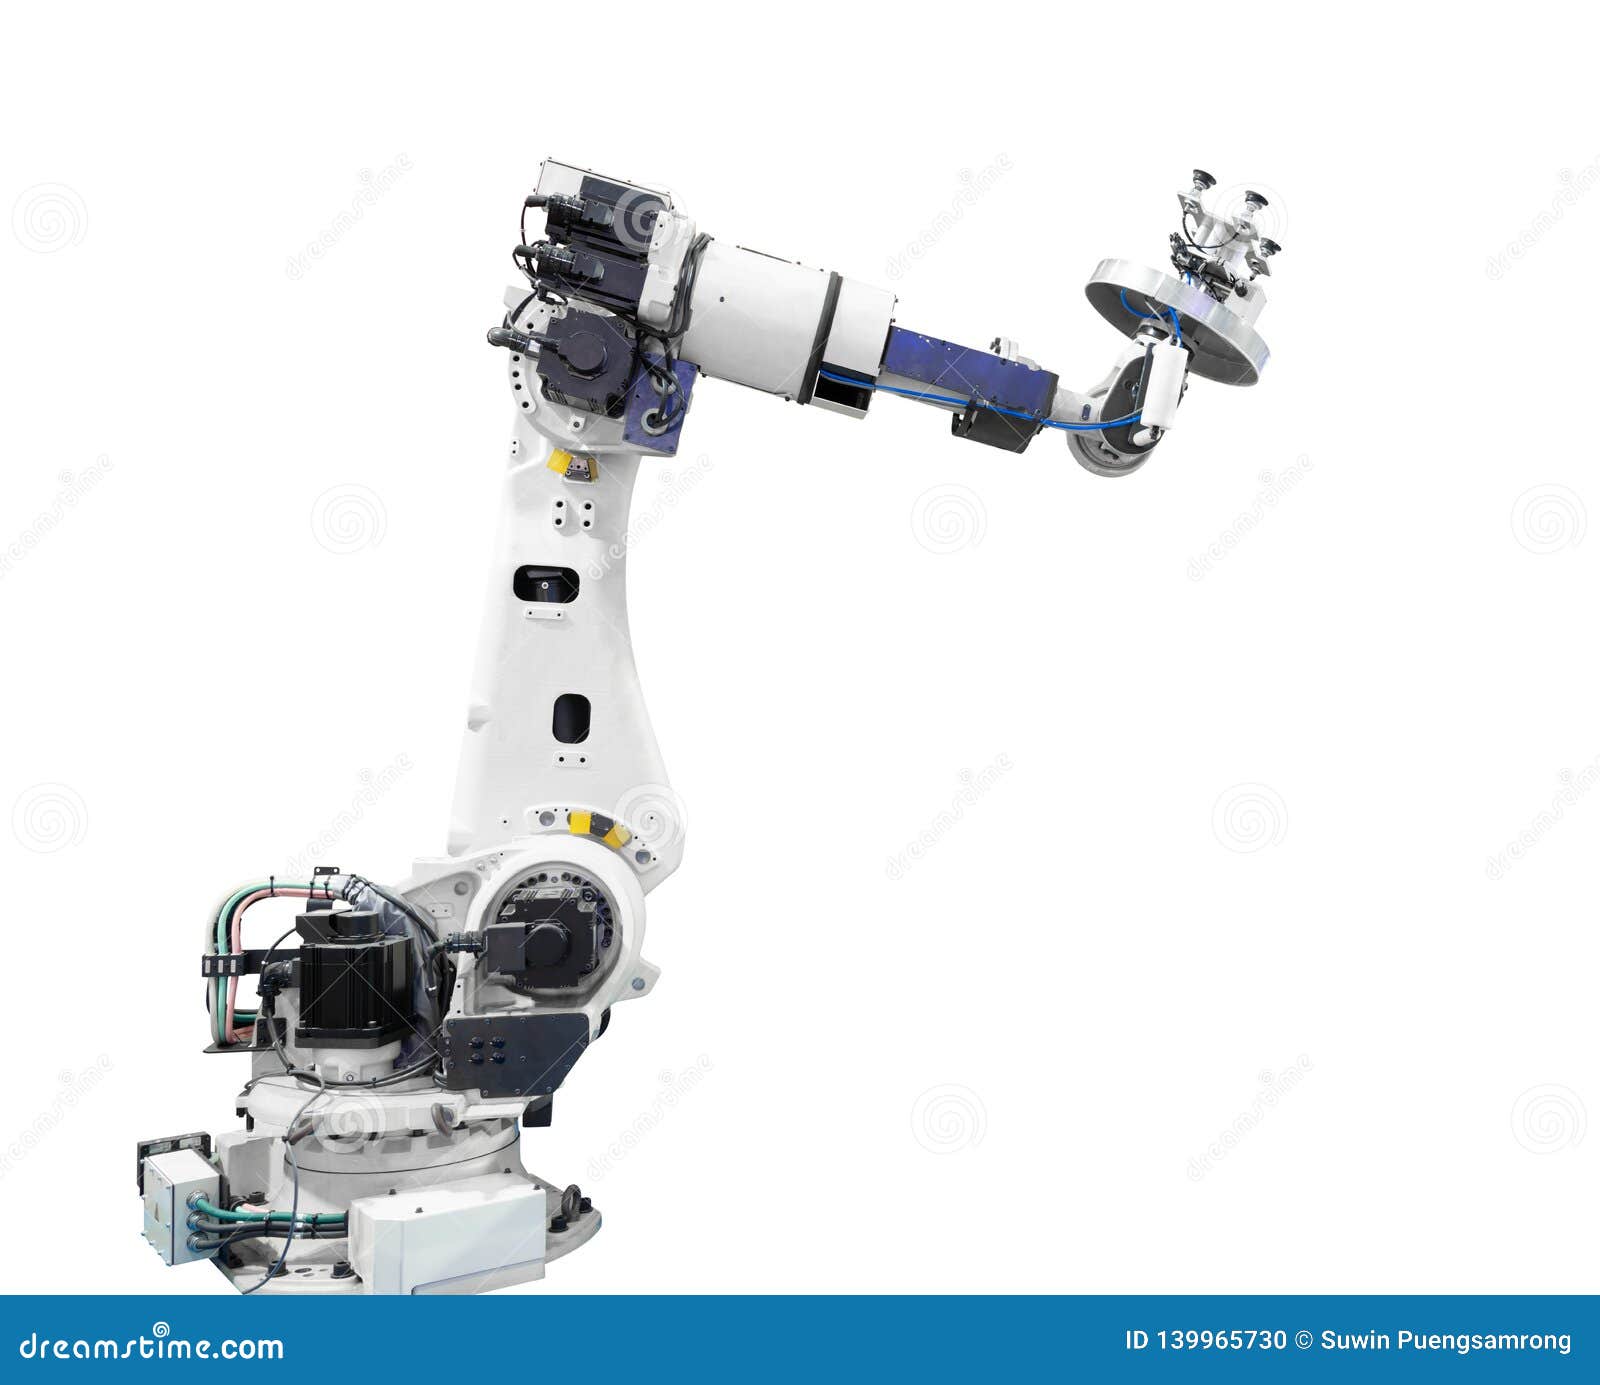 industry robotic arm  included clipping path